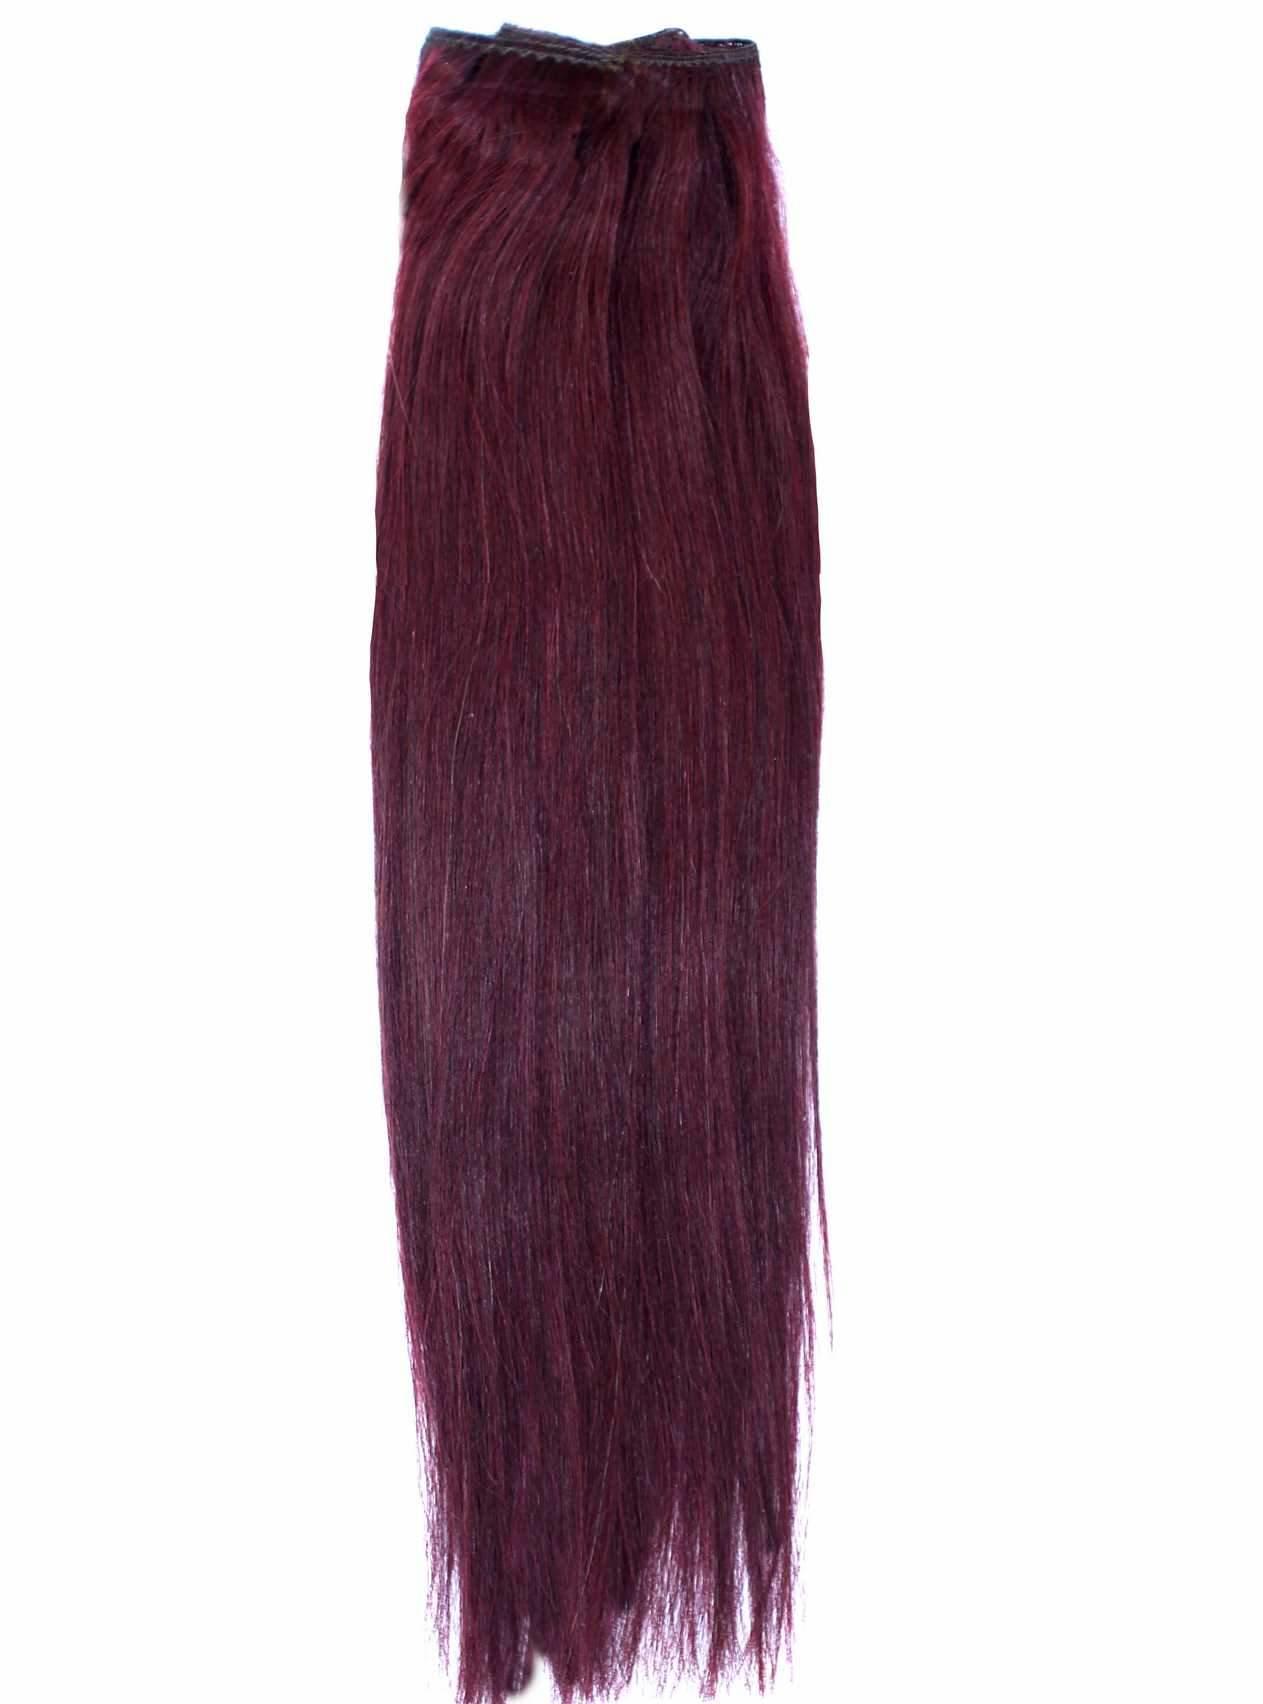 Weft Hair Extensions Plum Red (#99J 